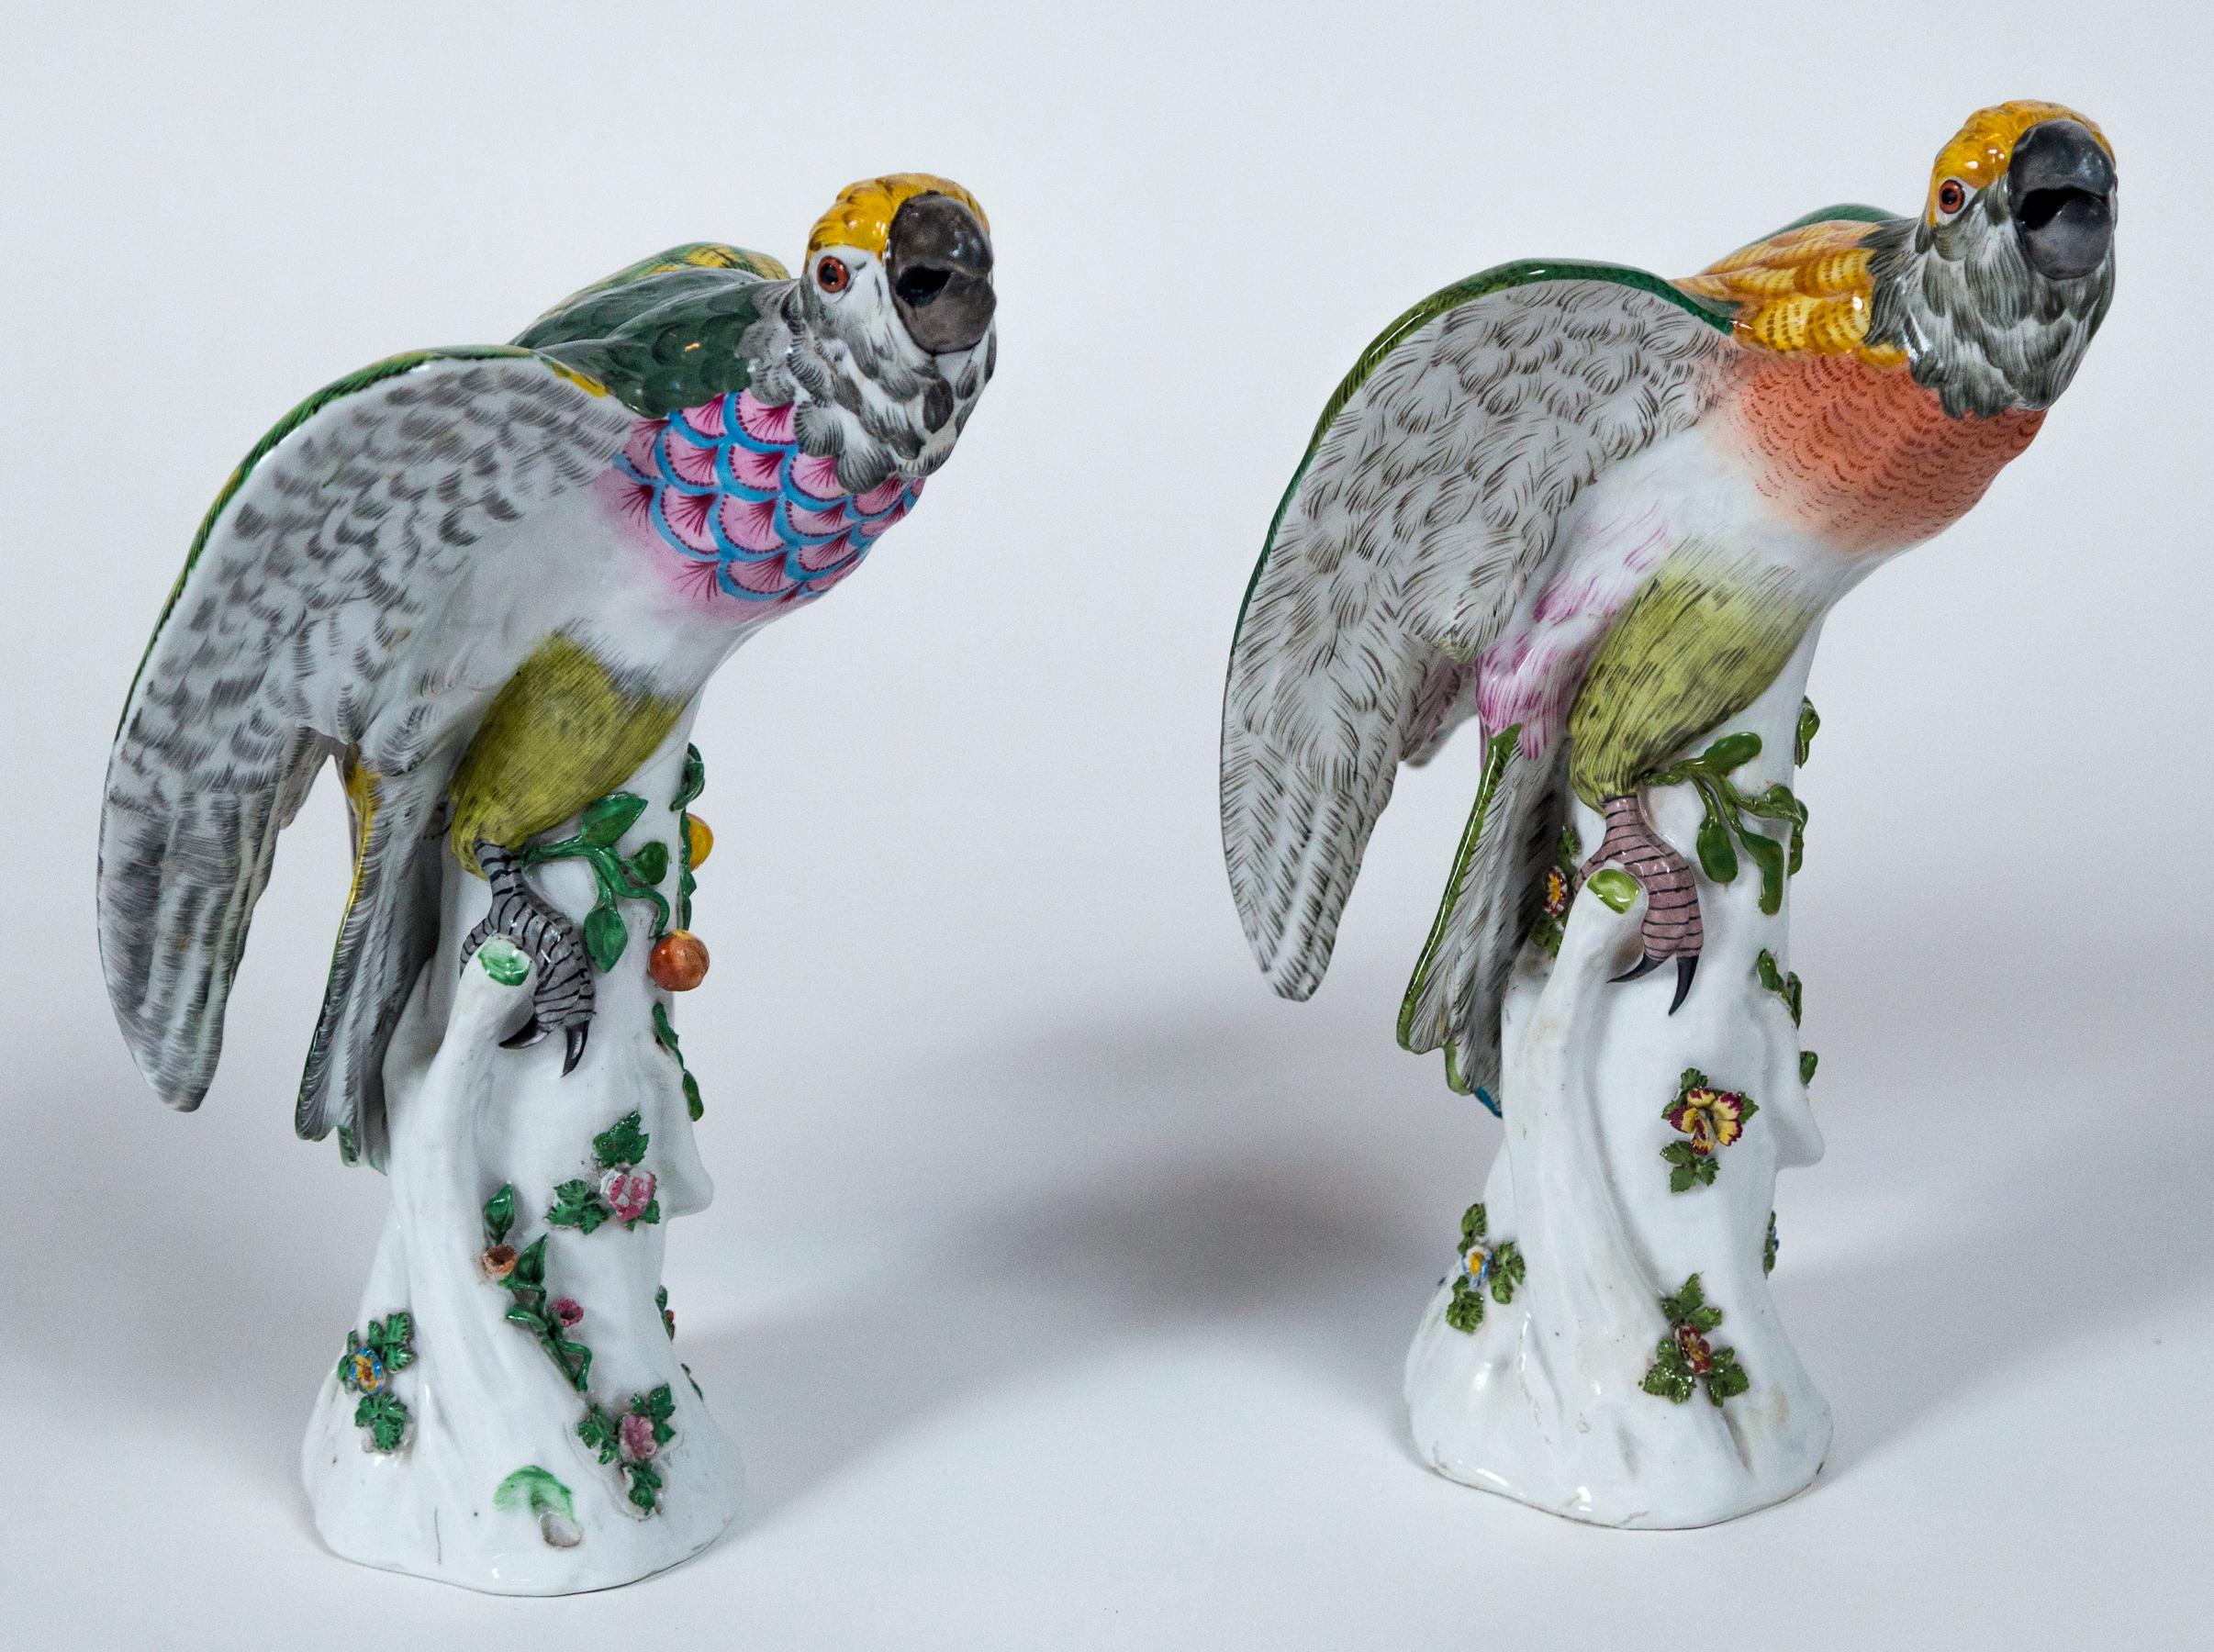 Pair of vintage European porcelain parrots. Beautifully detailed with colorful glazing. Parrots are perched on tree trunks with appliquéd floral designs.